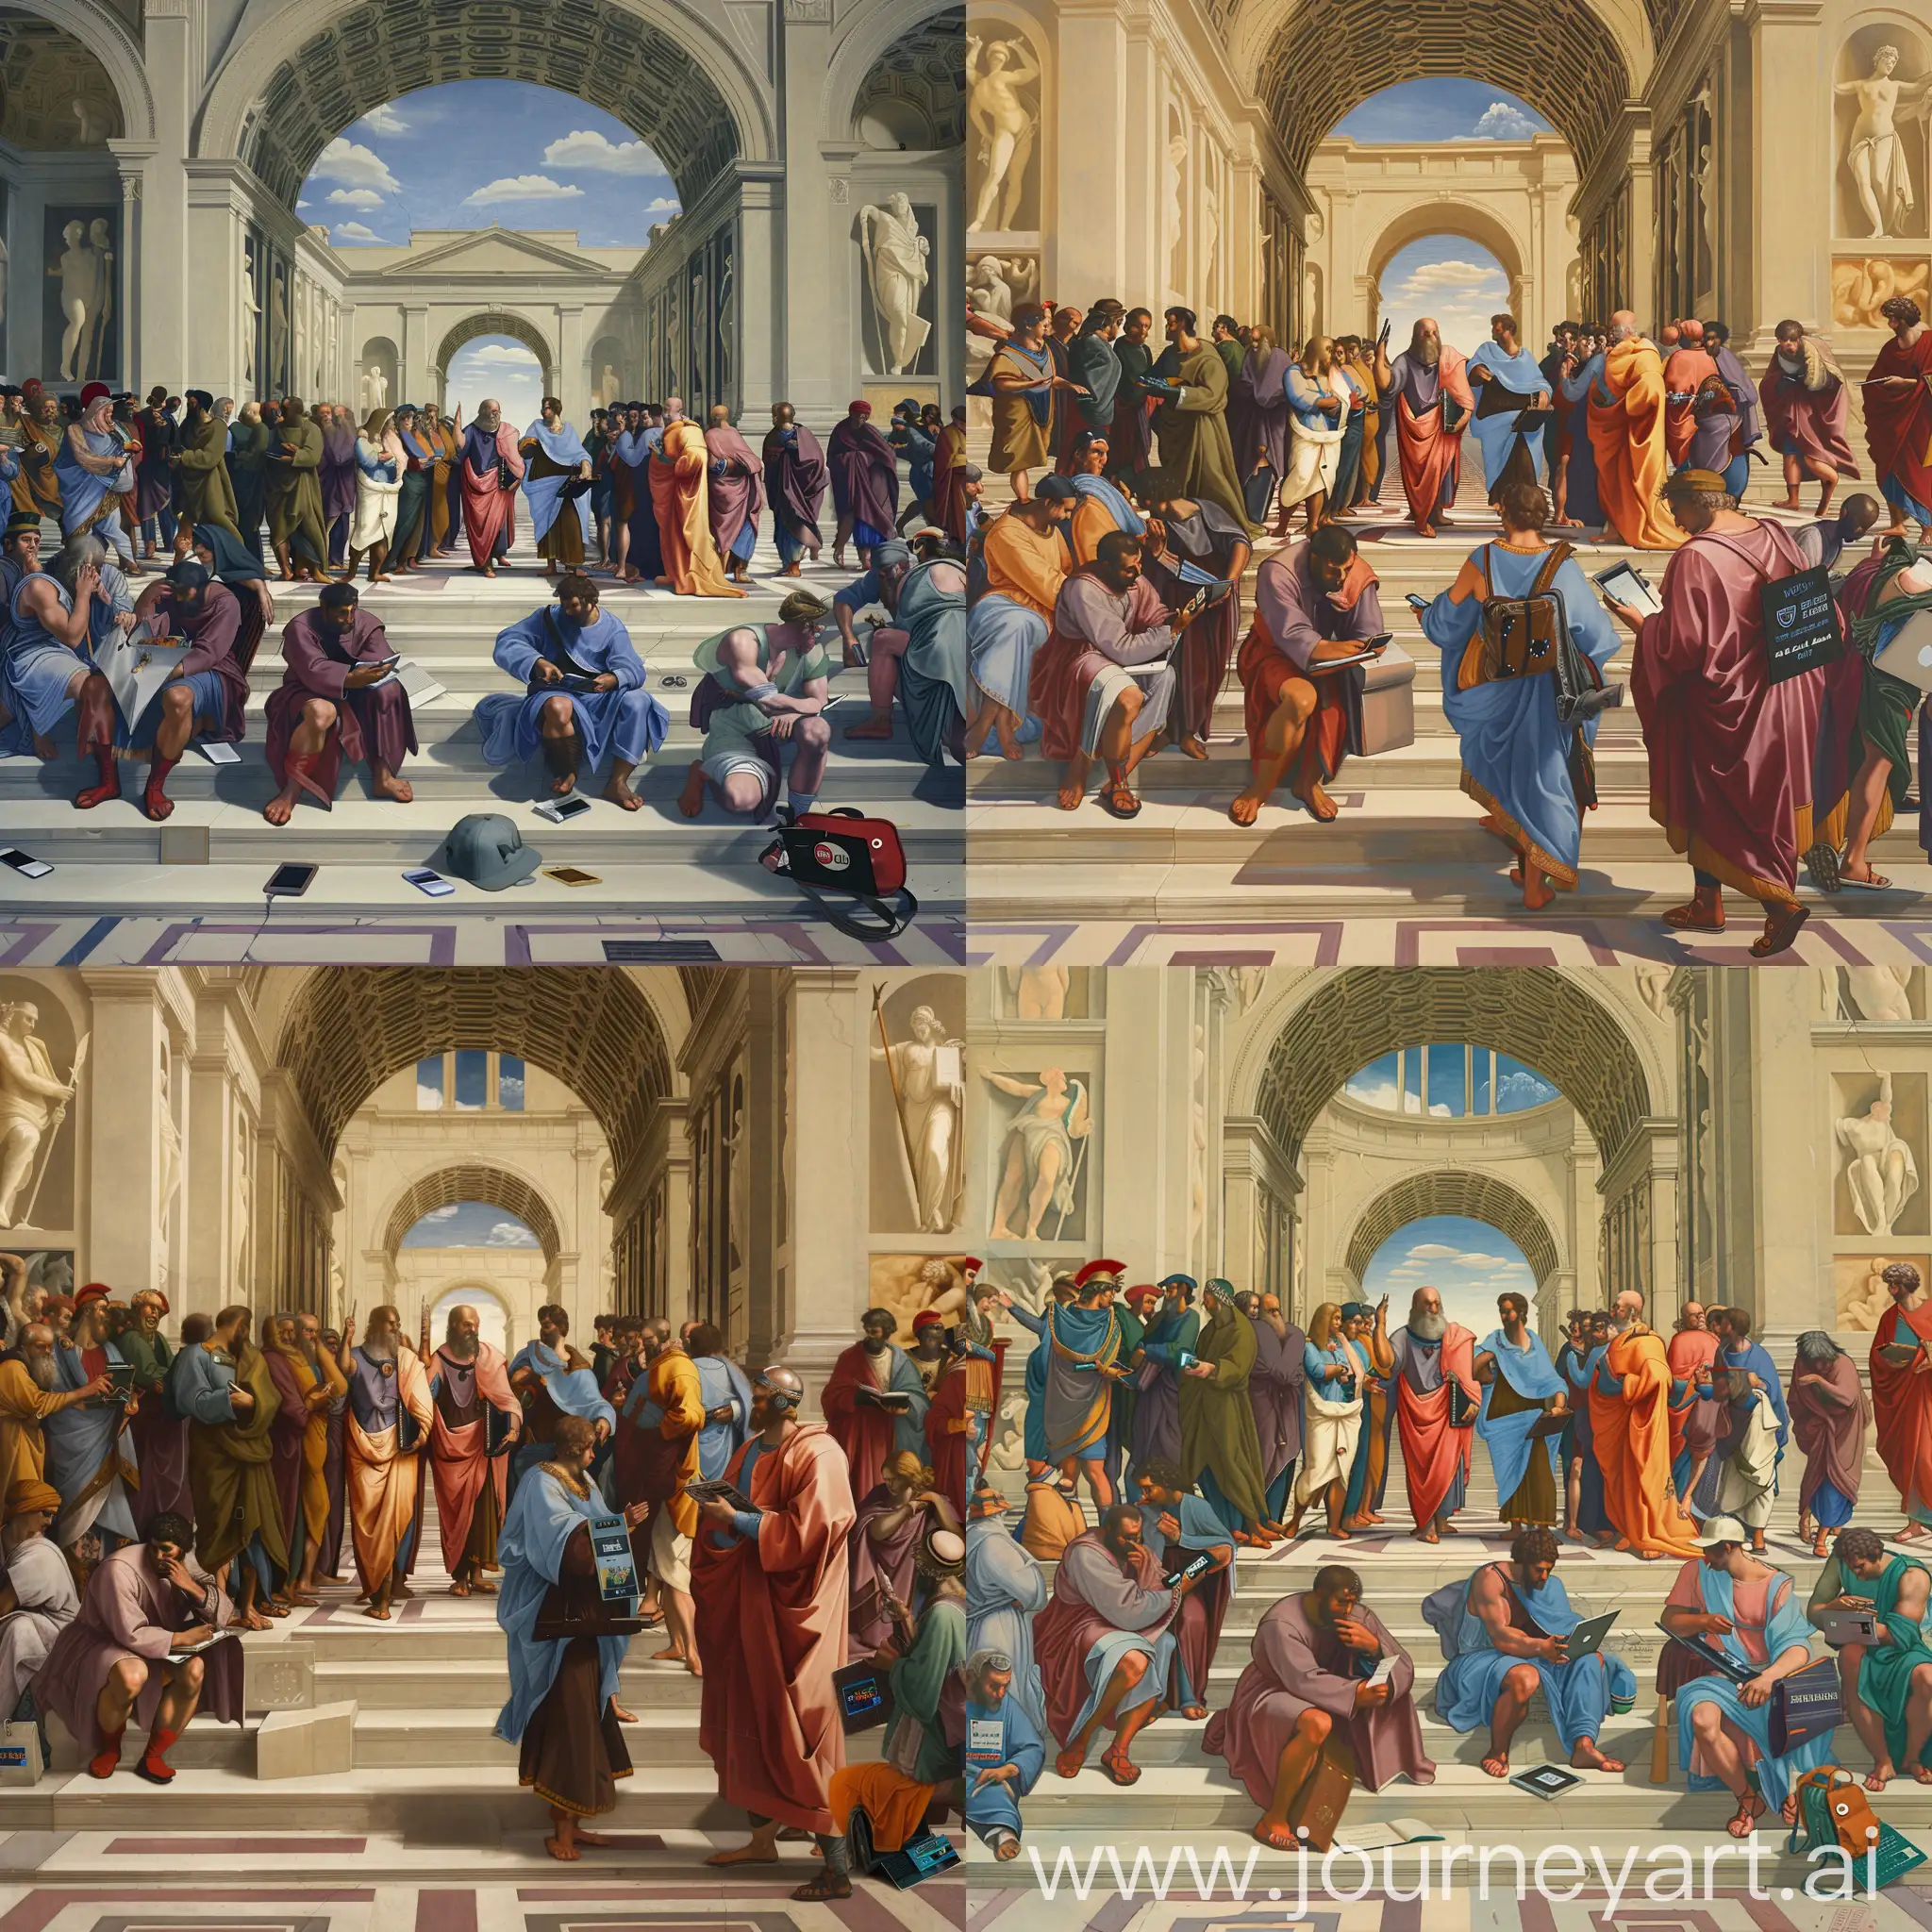 Imagine a reinterpretation of Raphael's 'The School of Athens,' where the classical philosophers are replaced with modern programmers. The setting retains its grand architecture and spatial dynamics, with the iconic arches and steps, but the figures, while dressed in the traditional robes of ancient Greece and Rome, are engaging with modern technology. In the midst of this historic assembly, some figures are seen holding smartphones, while others have laptops with Linux stickers visible. Backpacks rest against the ancient steps, and a few individuals wear baseball caps along with their robes, adding a contemporary twist to their ancient attire.